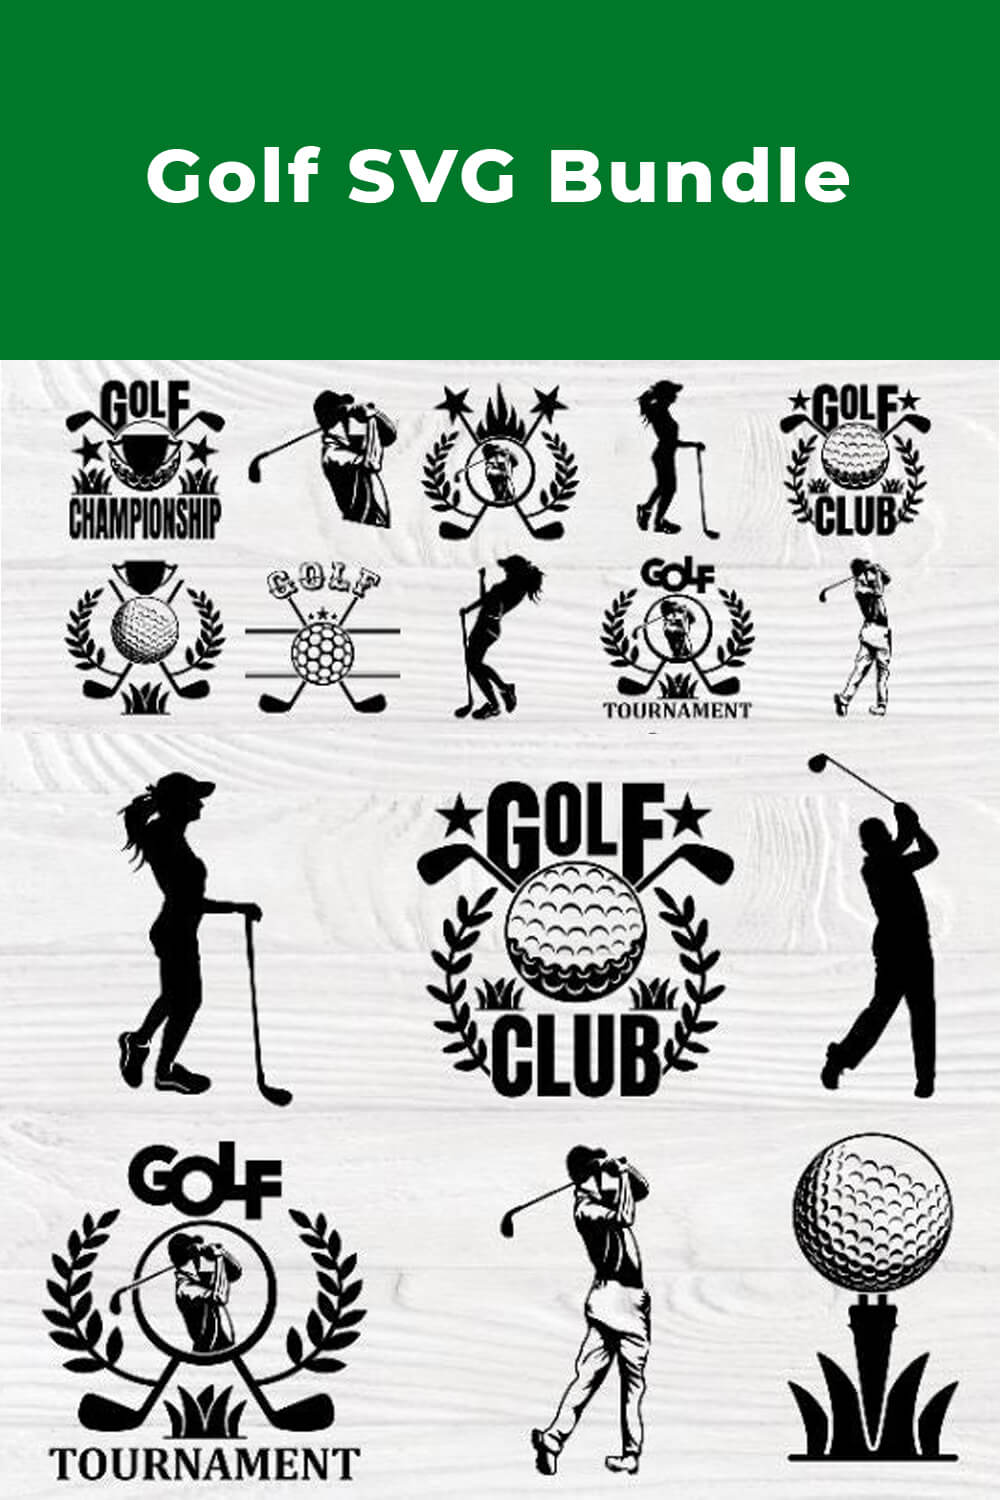 Black and white pictograms about golf in different sizes on a gray background and the name of the product on a green background.